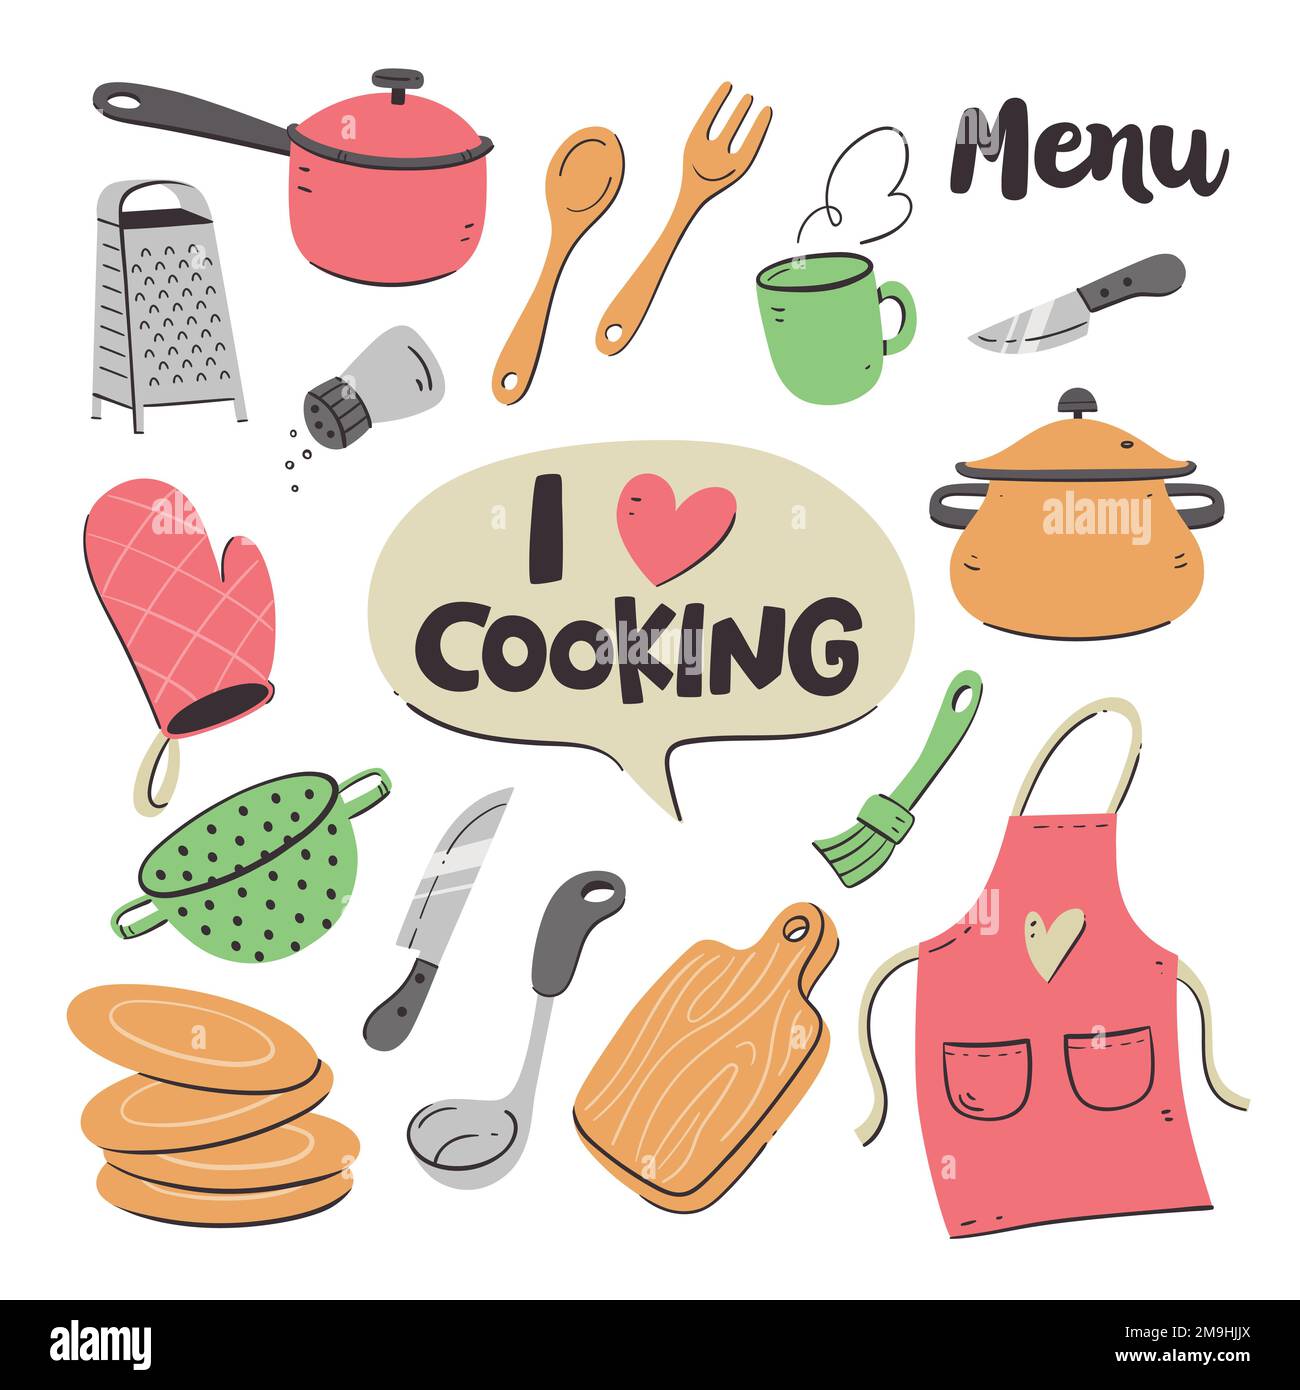 https://c8.alamy.com/comp/2M9HJJX/kitchen-tools-and-appliances-cute-illustration-with-isolated-cooking-objects-in-vector-format-kitchen-utensils-collection-illustration-2-of-2-2M9HJJX.jpg